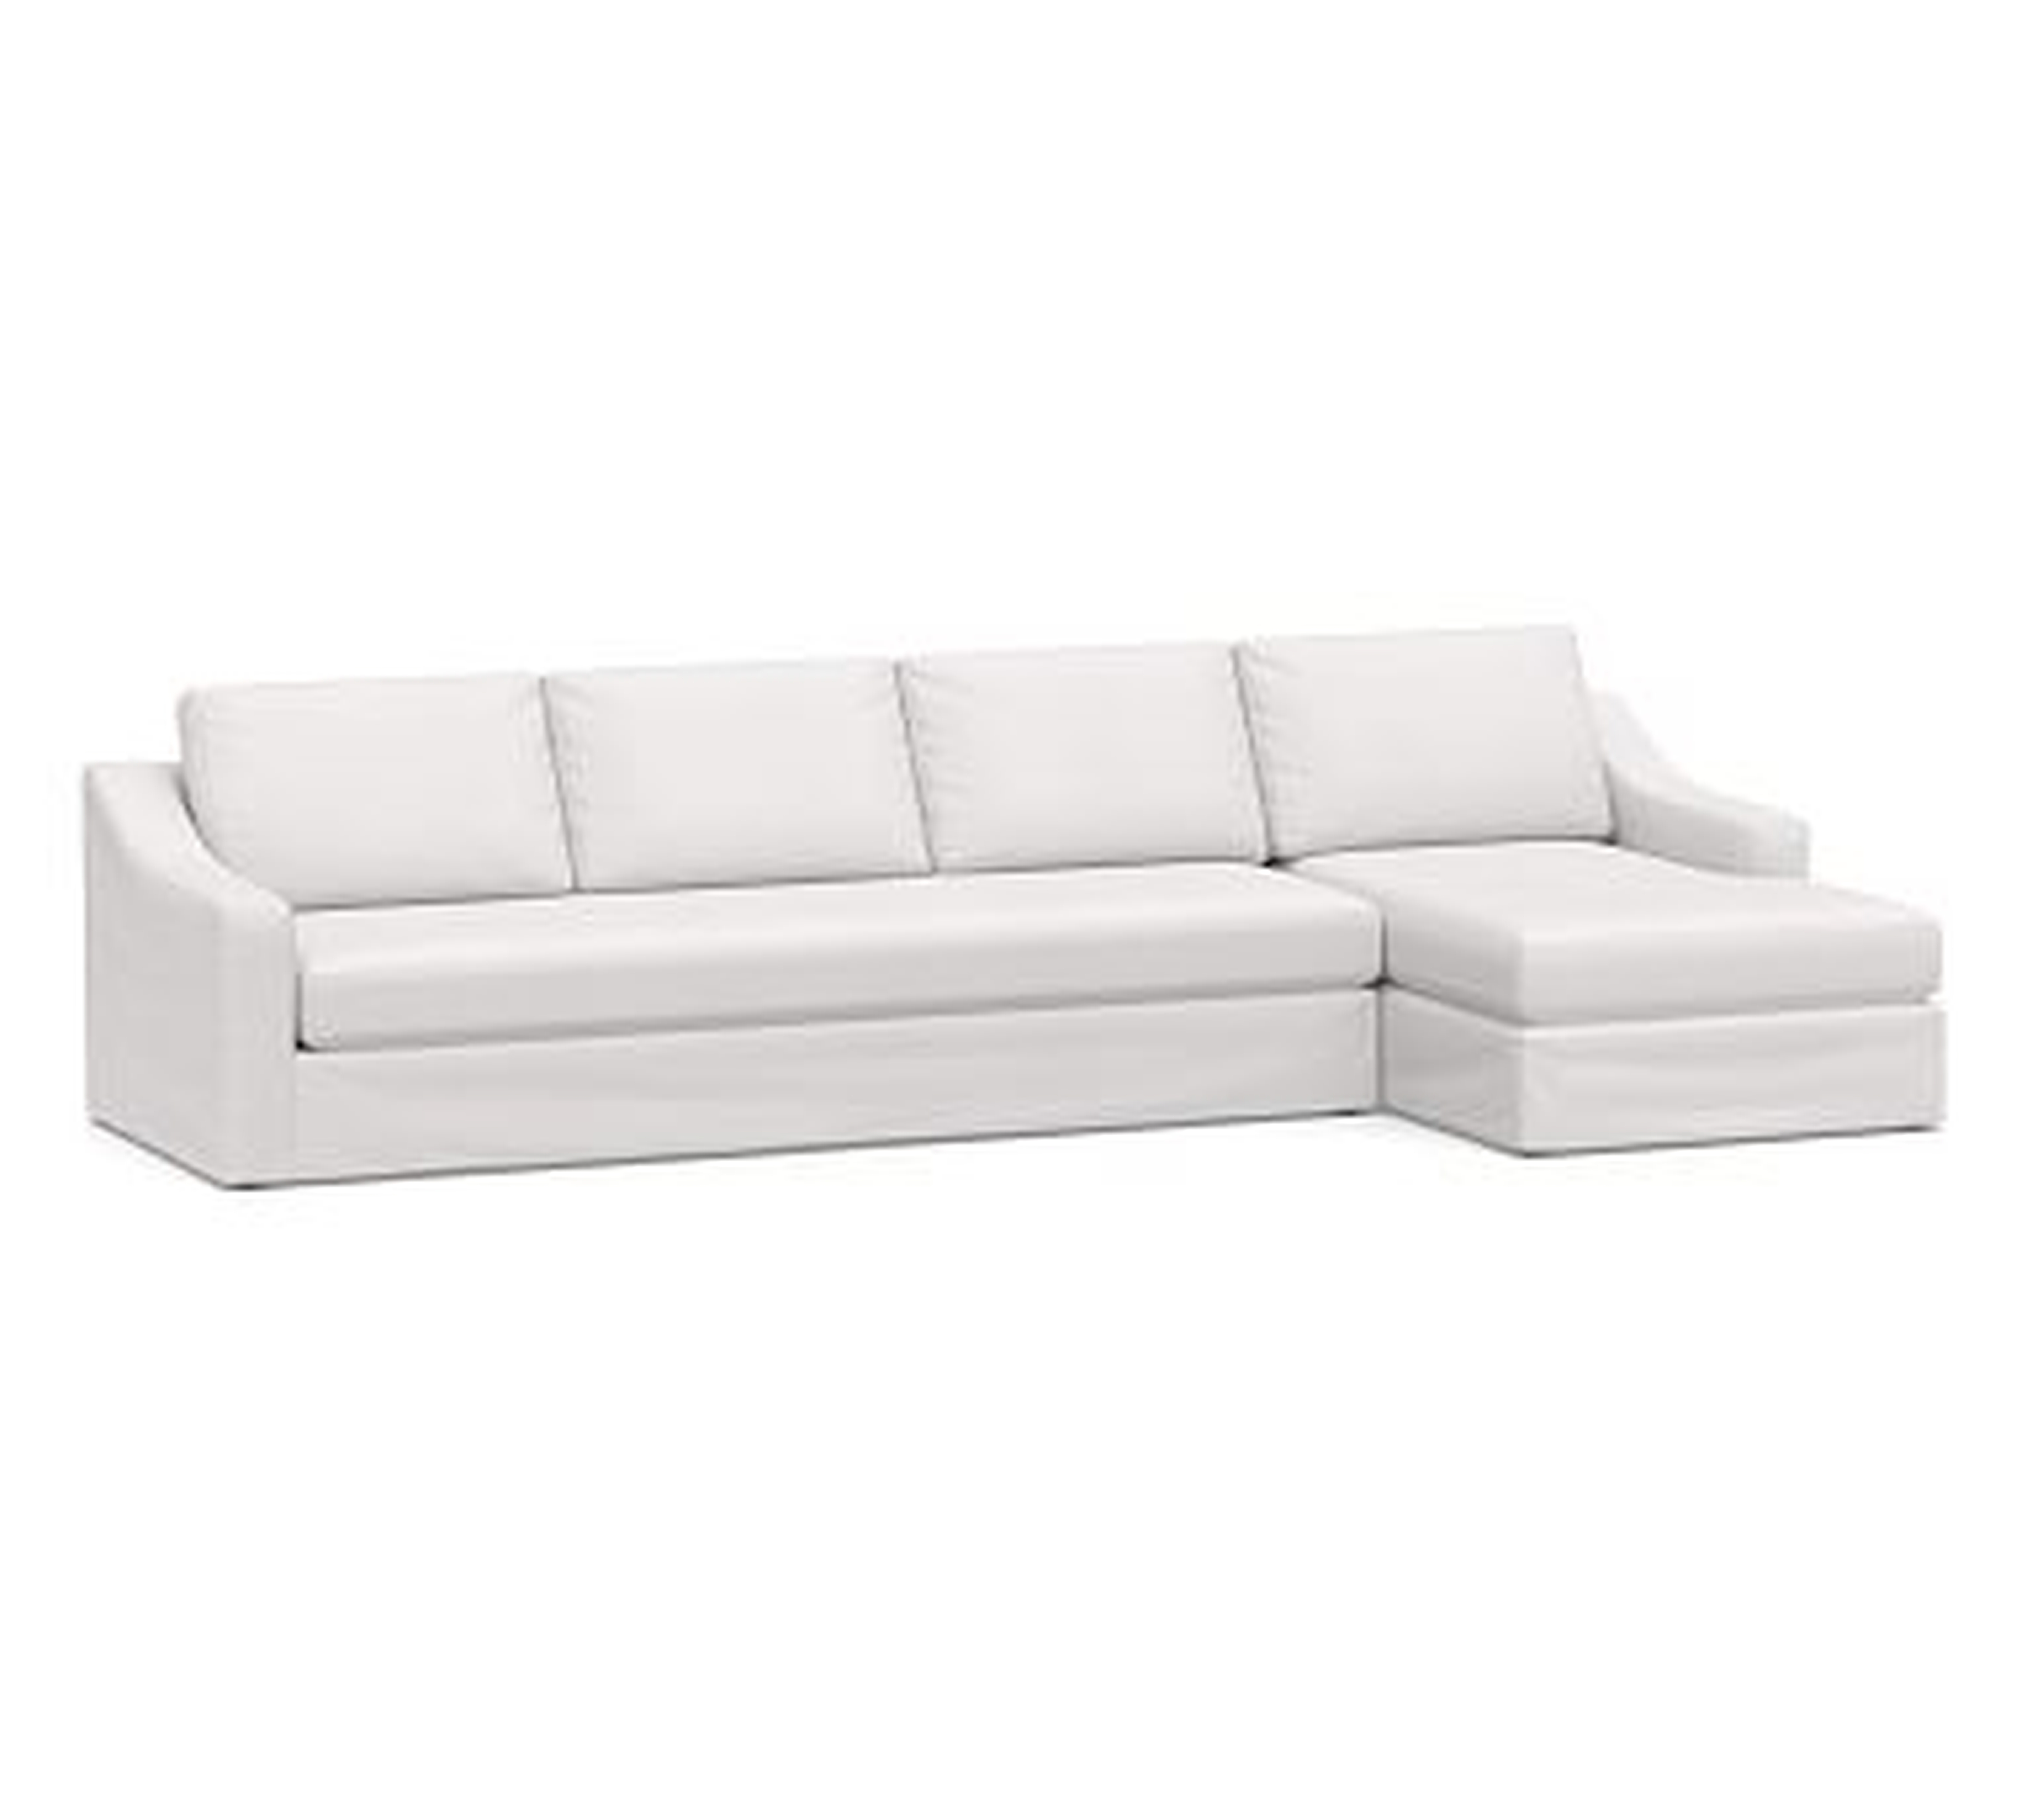 Big Sur Slope Arm Slipcovered Left Arm Grand Sofa with Chaise Sectional and Bench Cushion, Down Blend Wrapped Cushions, Twill White - Pottery Barn